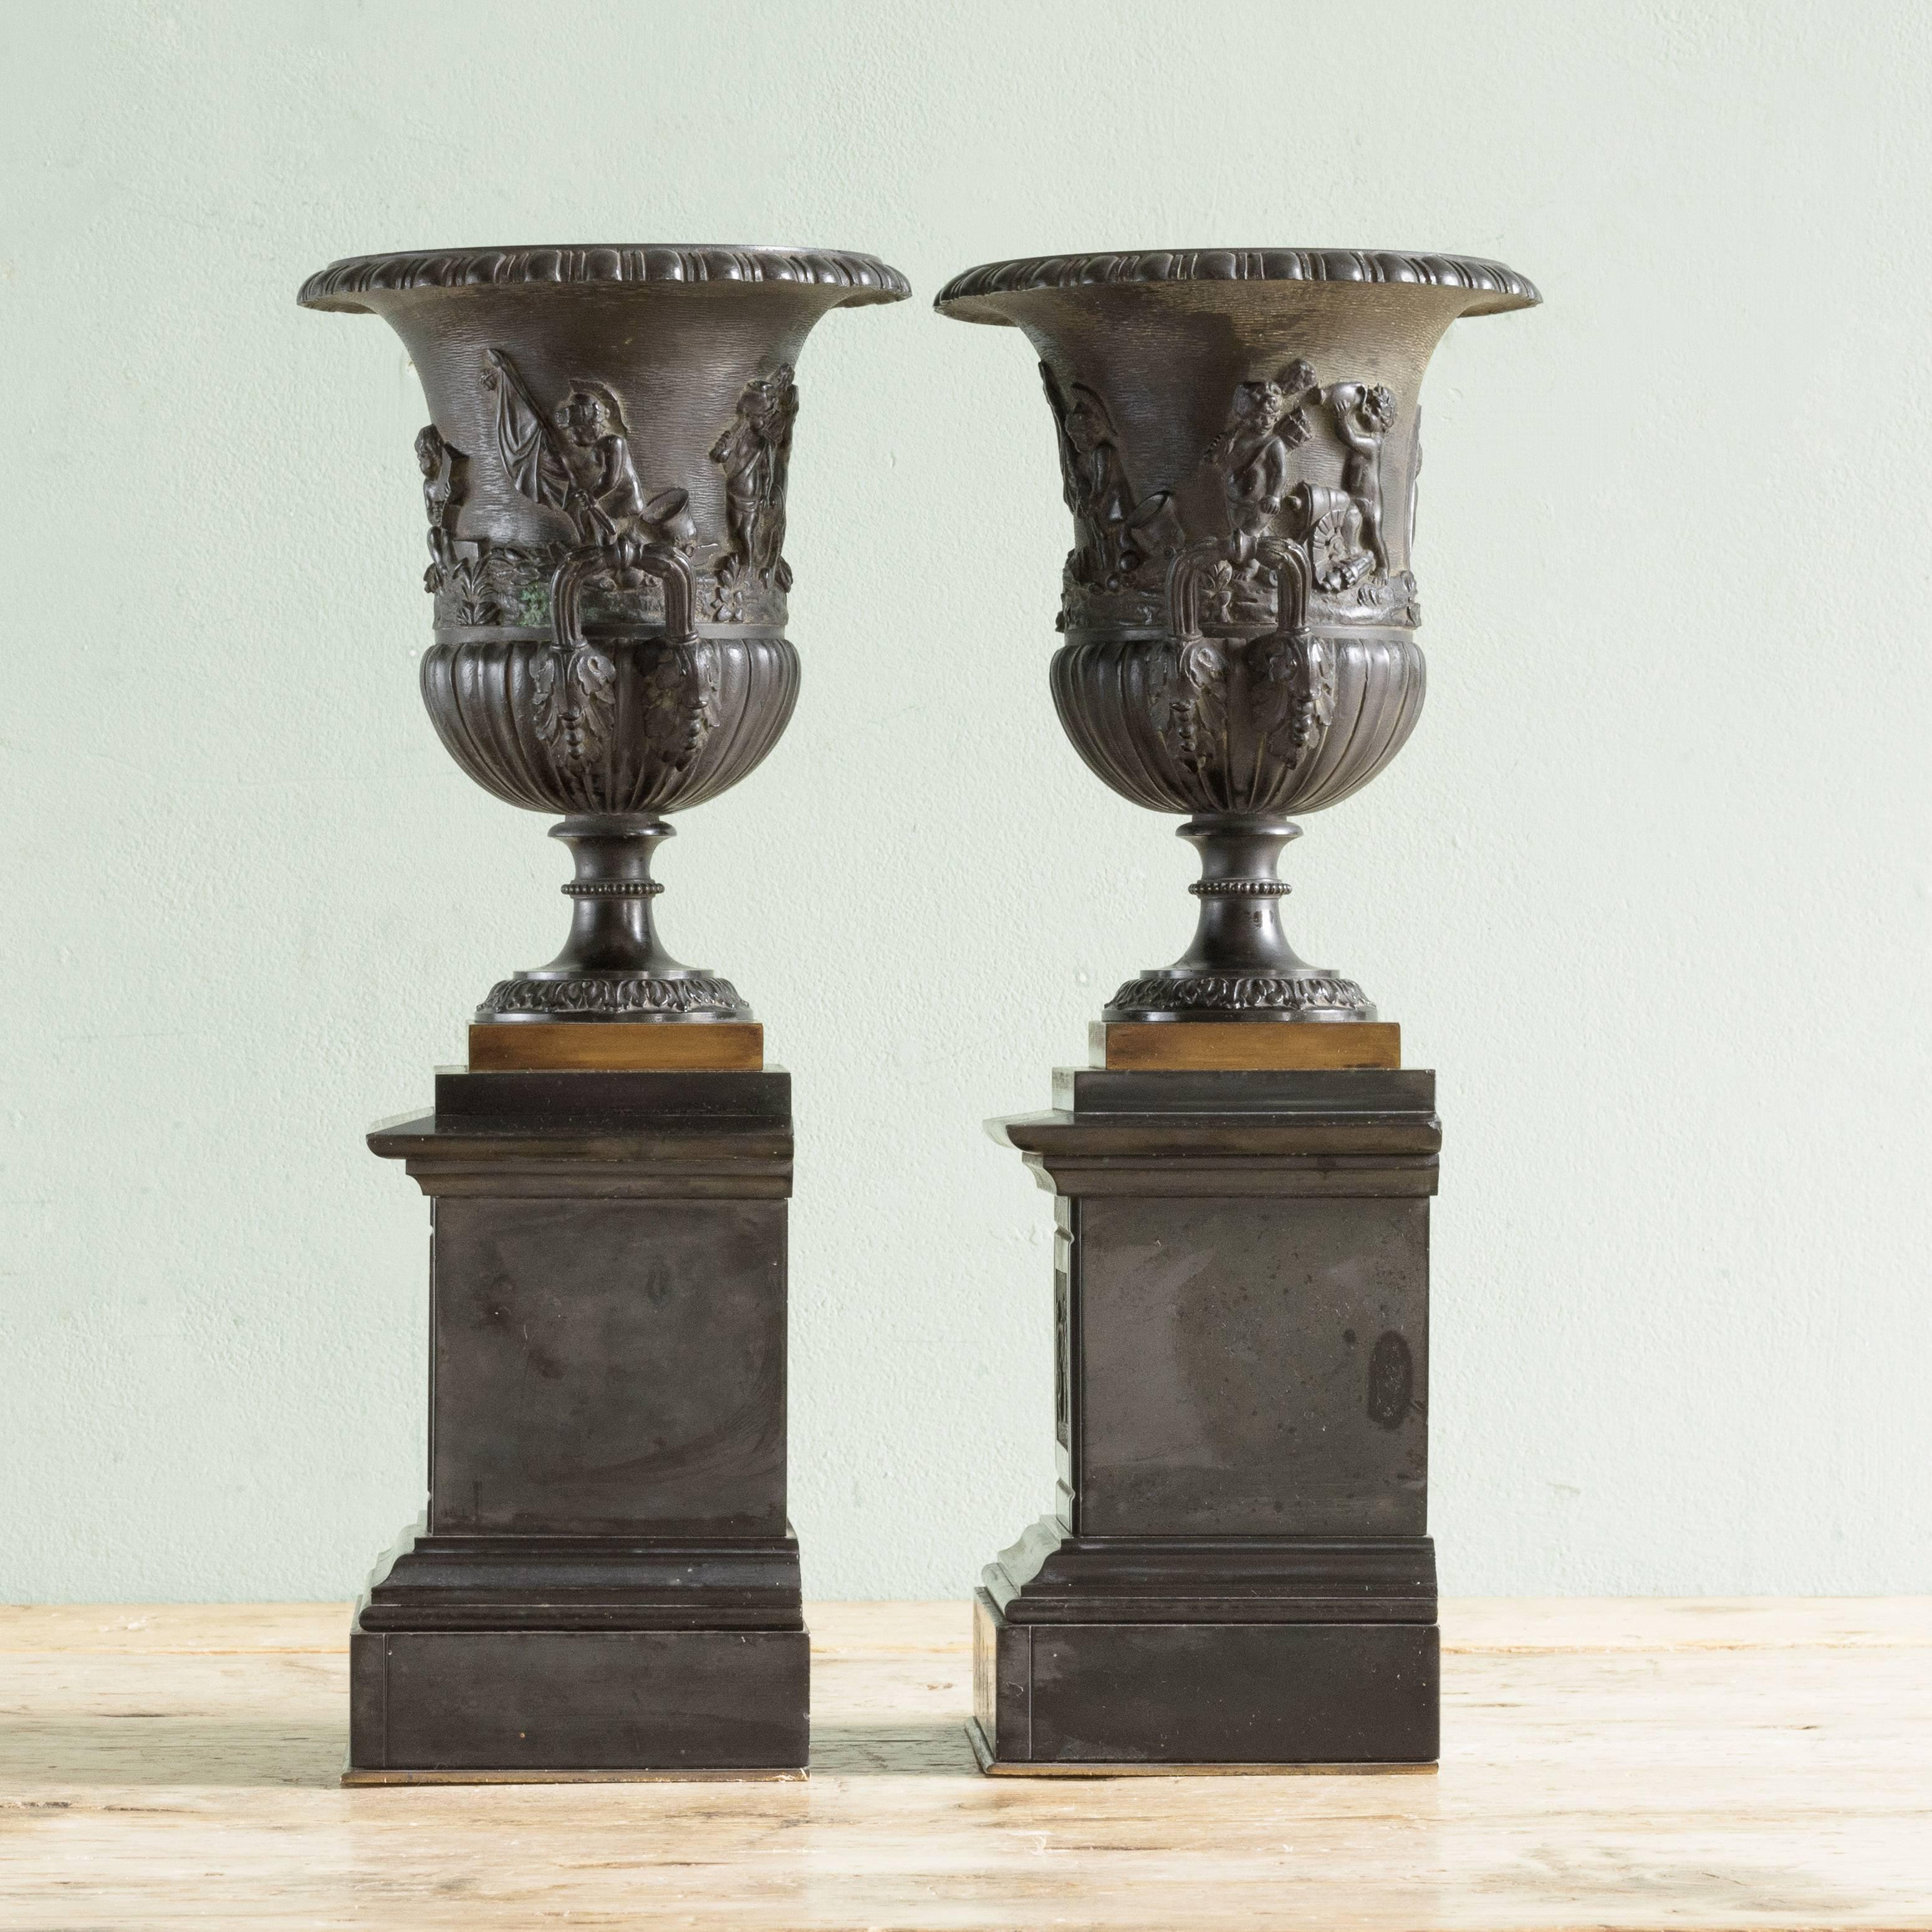 Pair of French, 19th century bronze and slate garniture de cheminée, the urns of campana form raised on decorated slate pedestals.